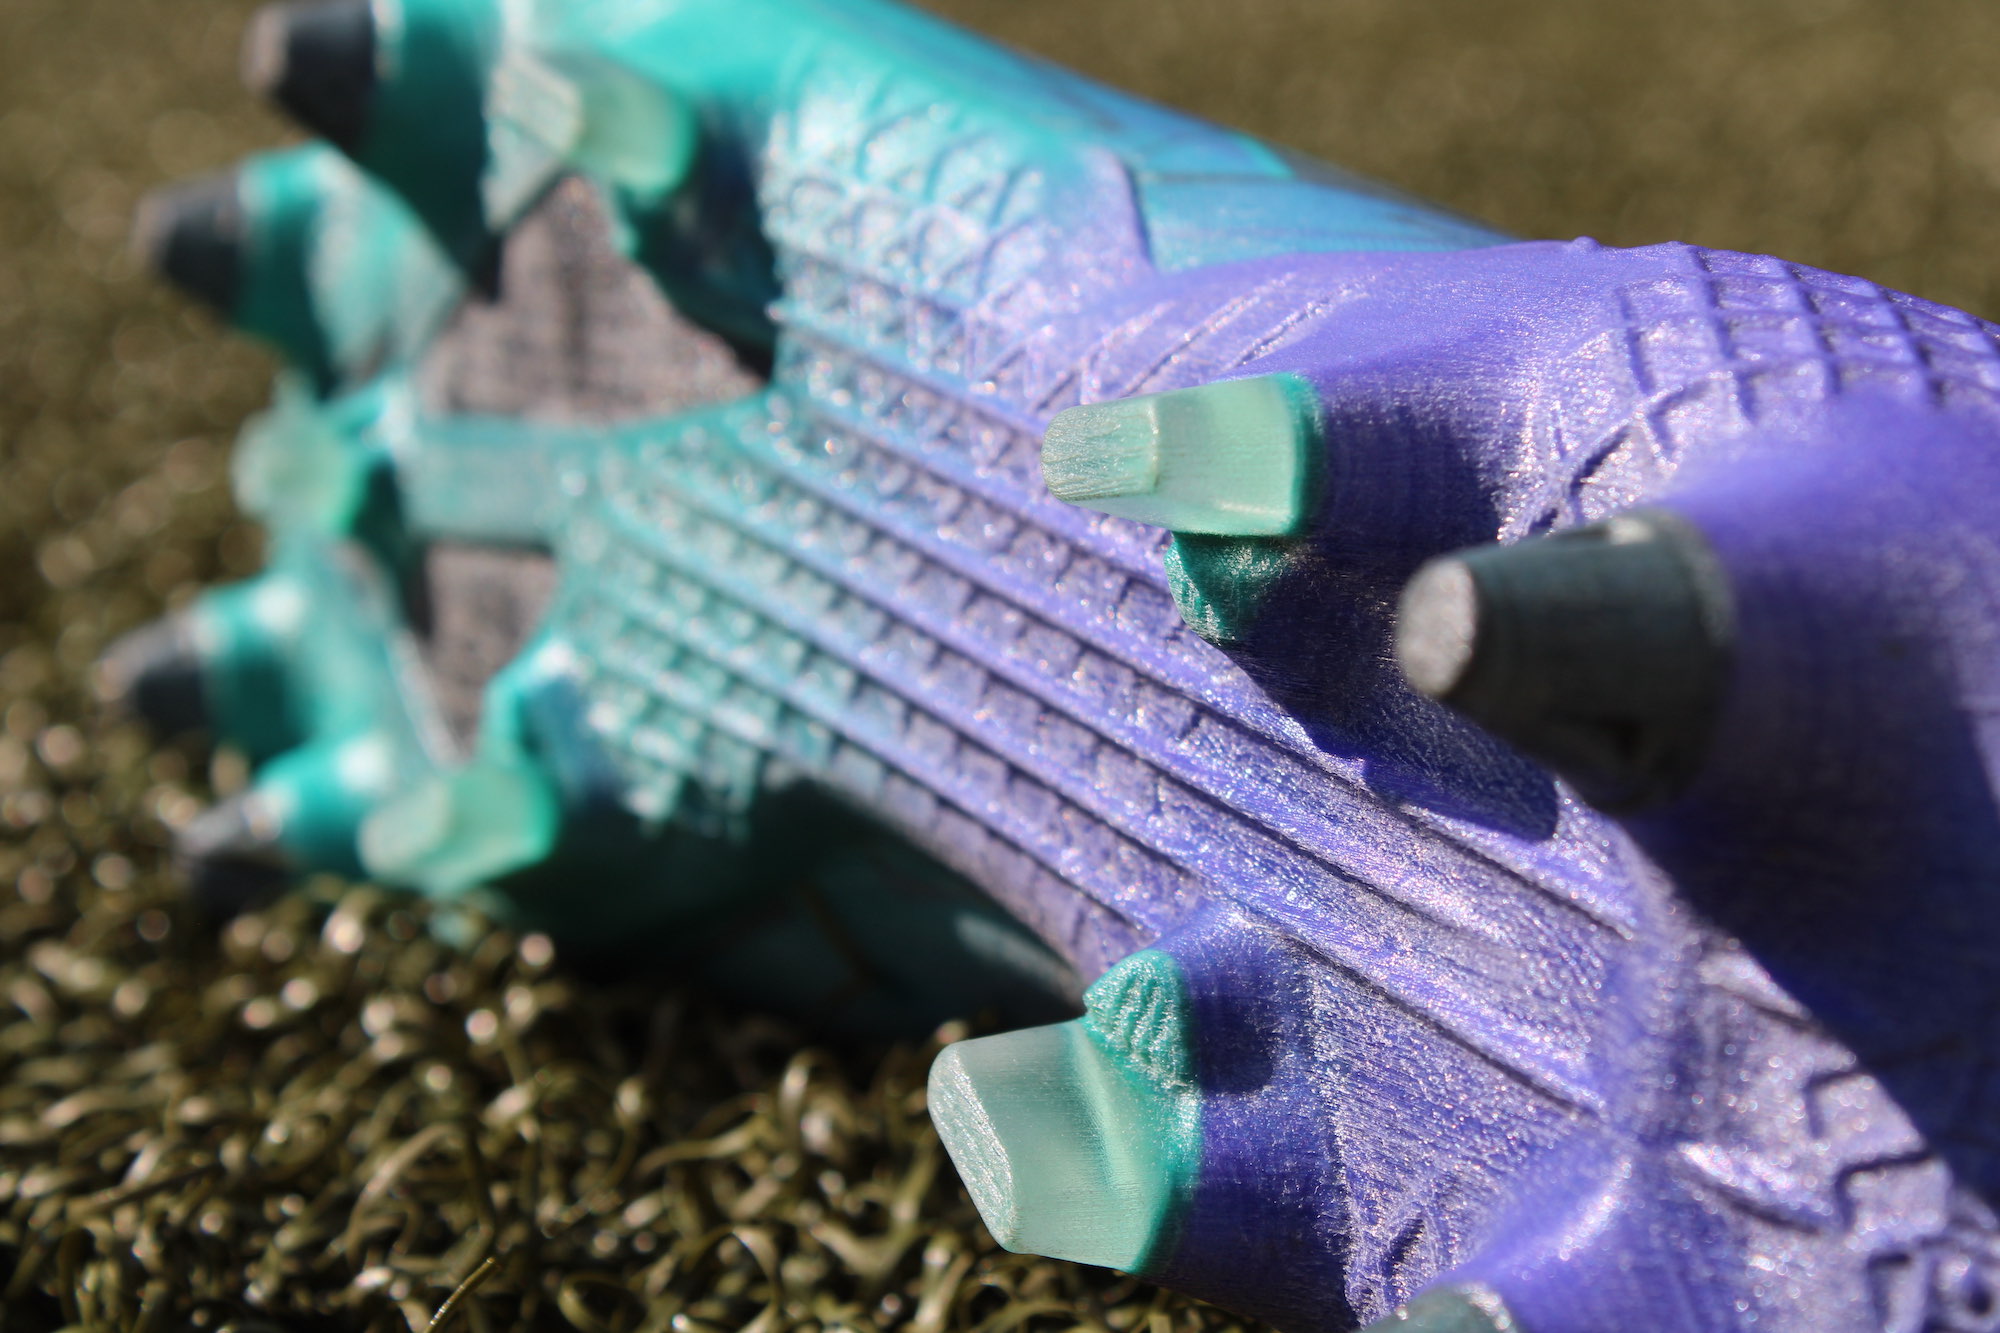 A realistic looking 3D printed football shoe